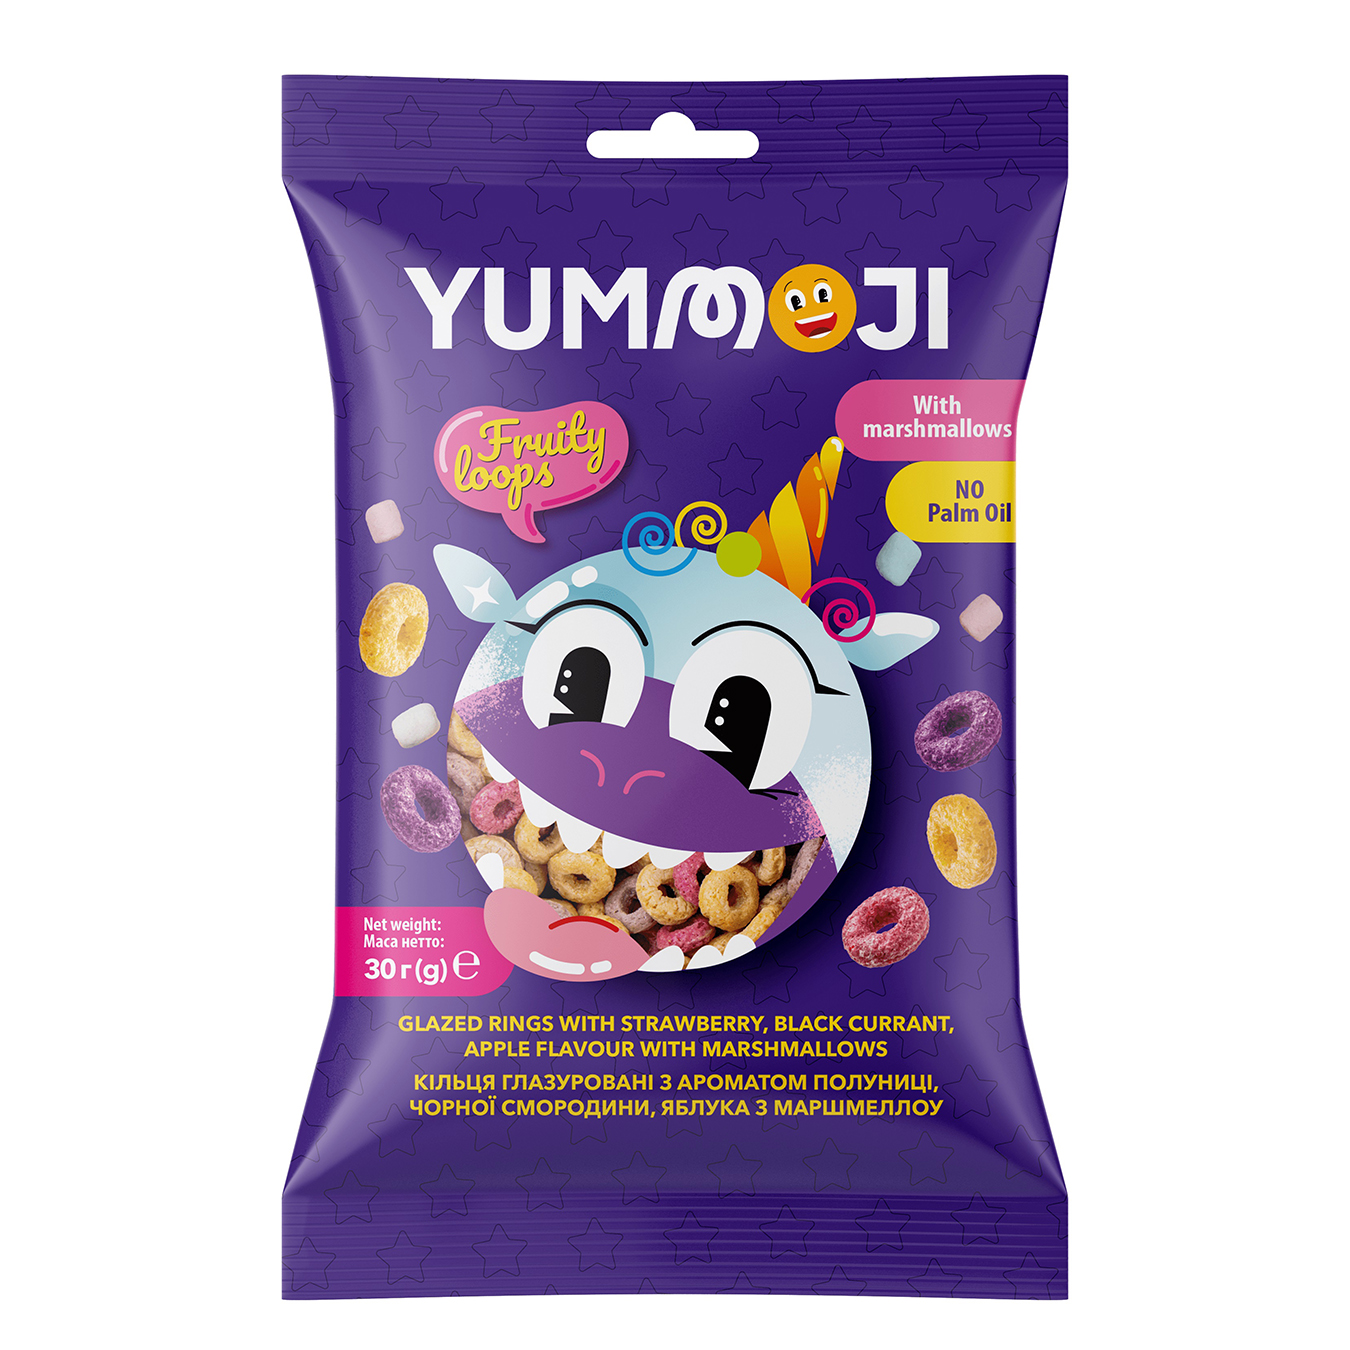 Breakfast is ready YUMMOJI glazed rings with strawberry-currant-apple flavor with added marshmallow 30g